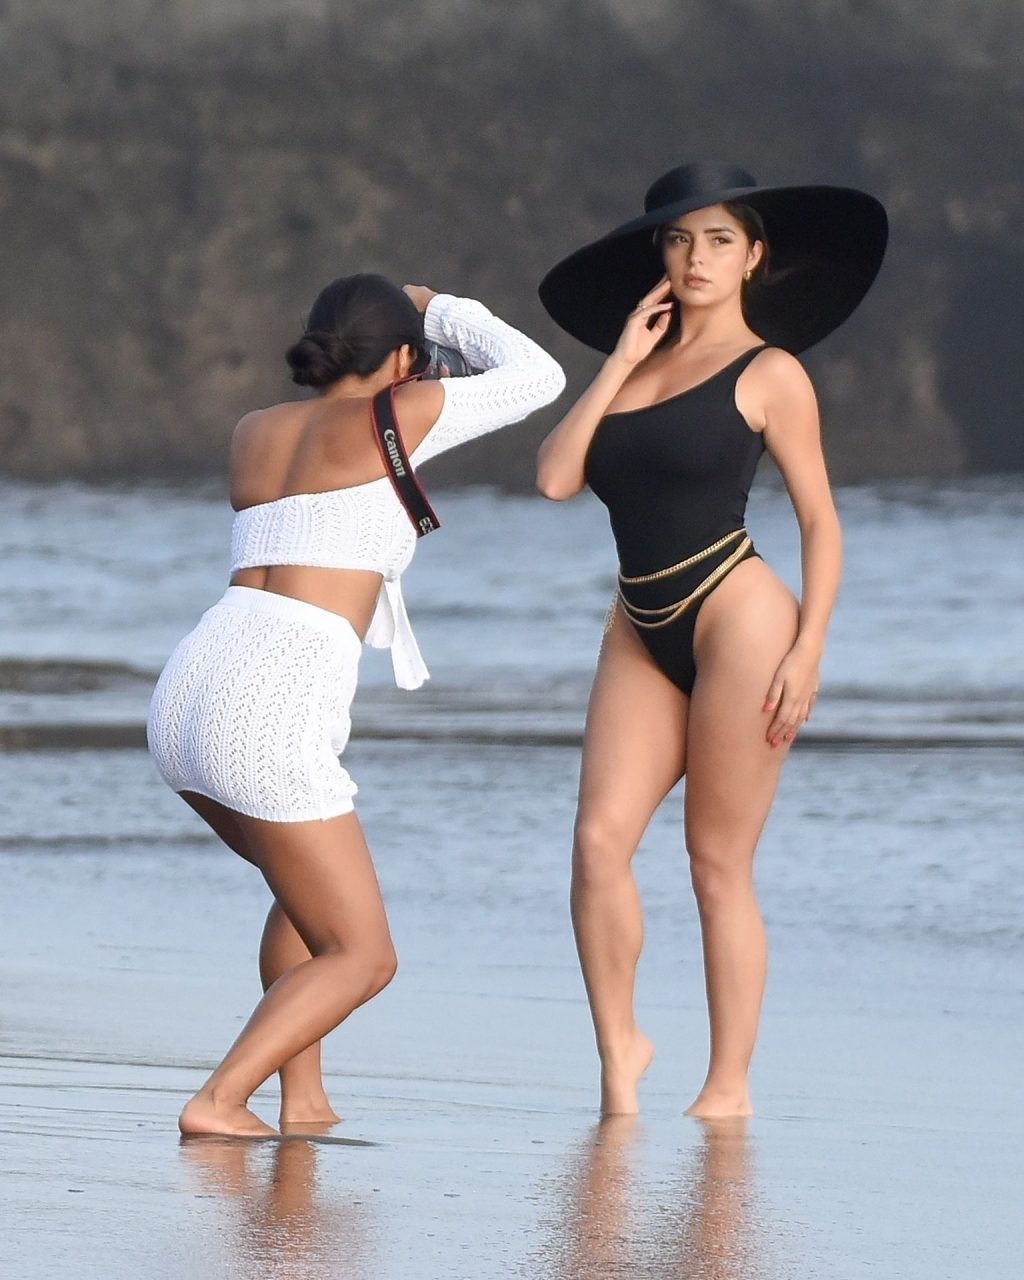 Demi Rose 2019 : Demi Rose – Spotted on the beach during a pH๏τoshoot in Bali Indonesia-03